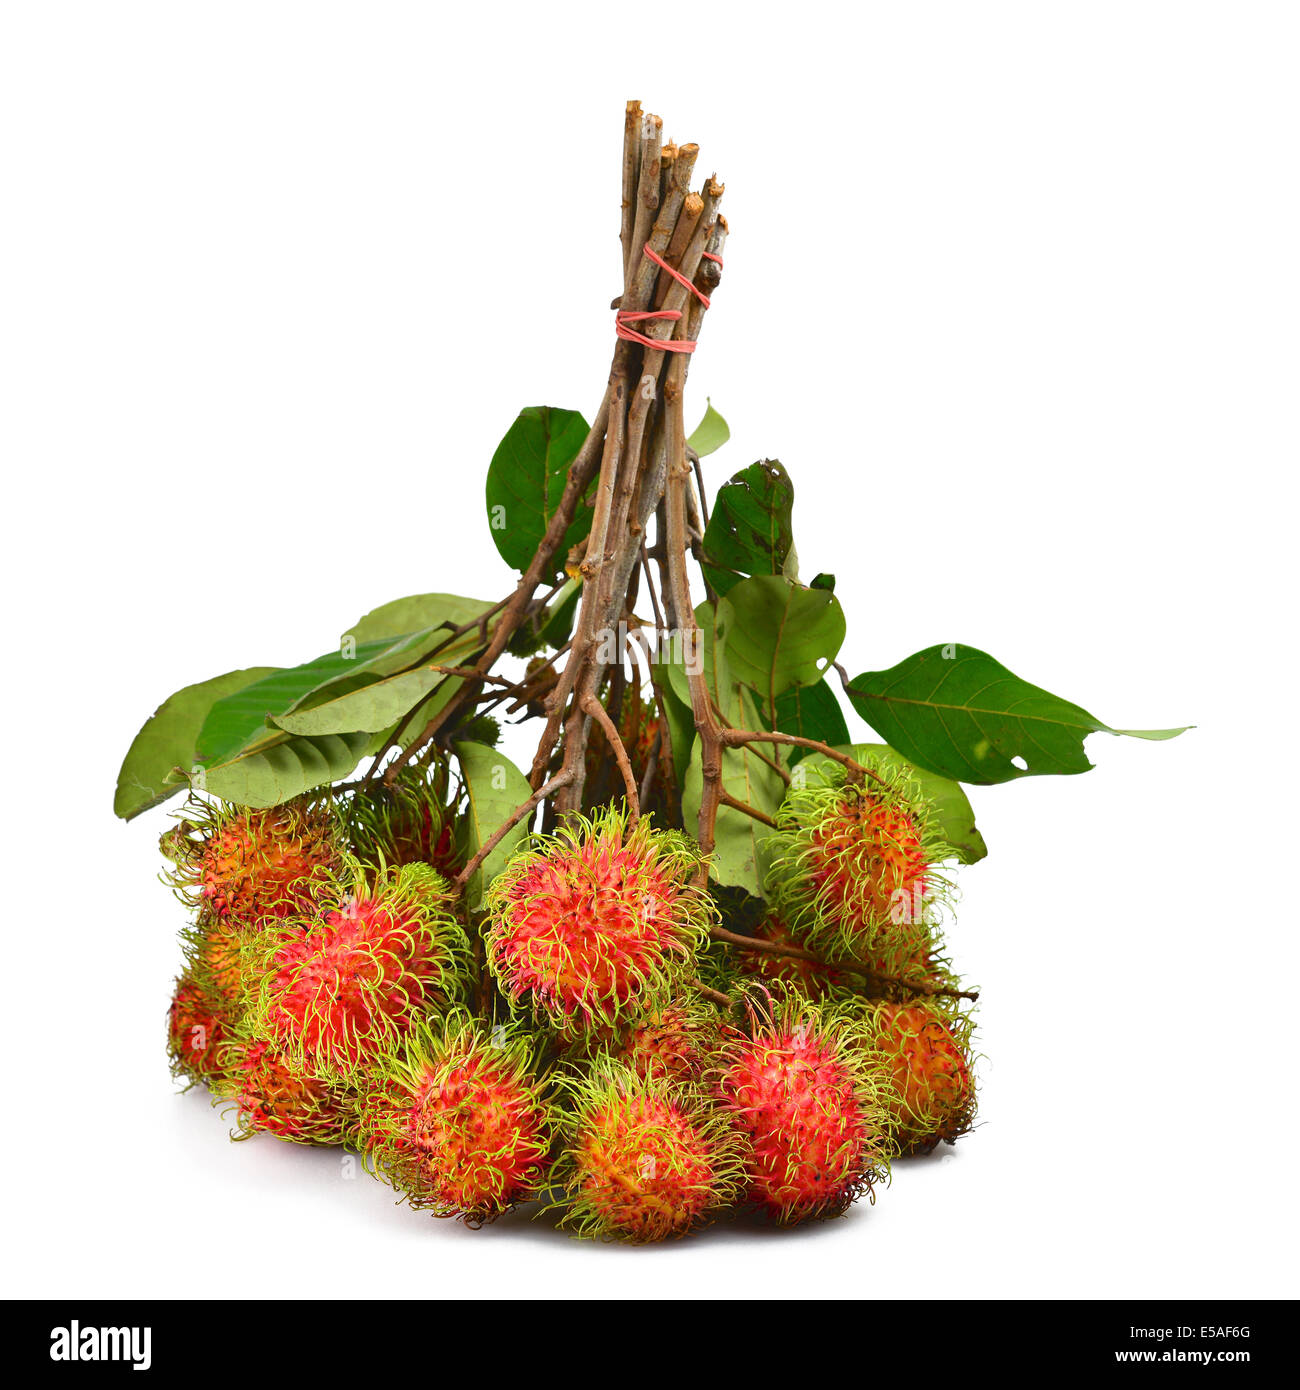 Rambutan fruit isolated on white Banque D'Images